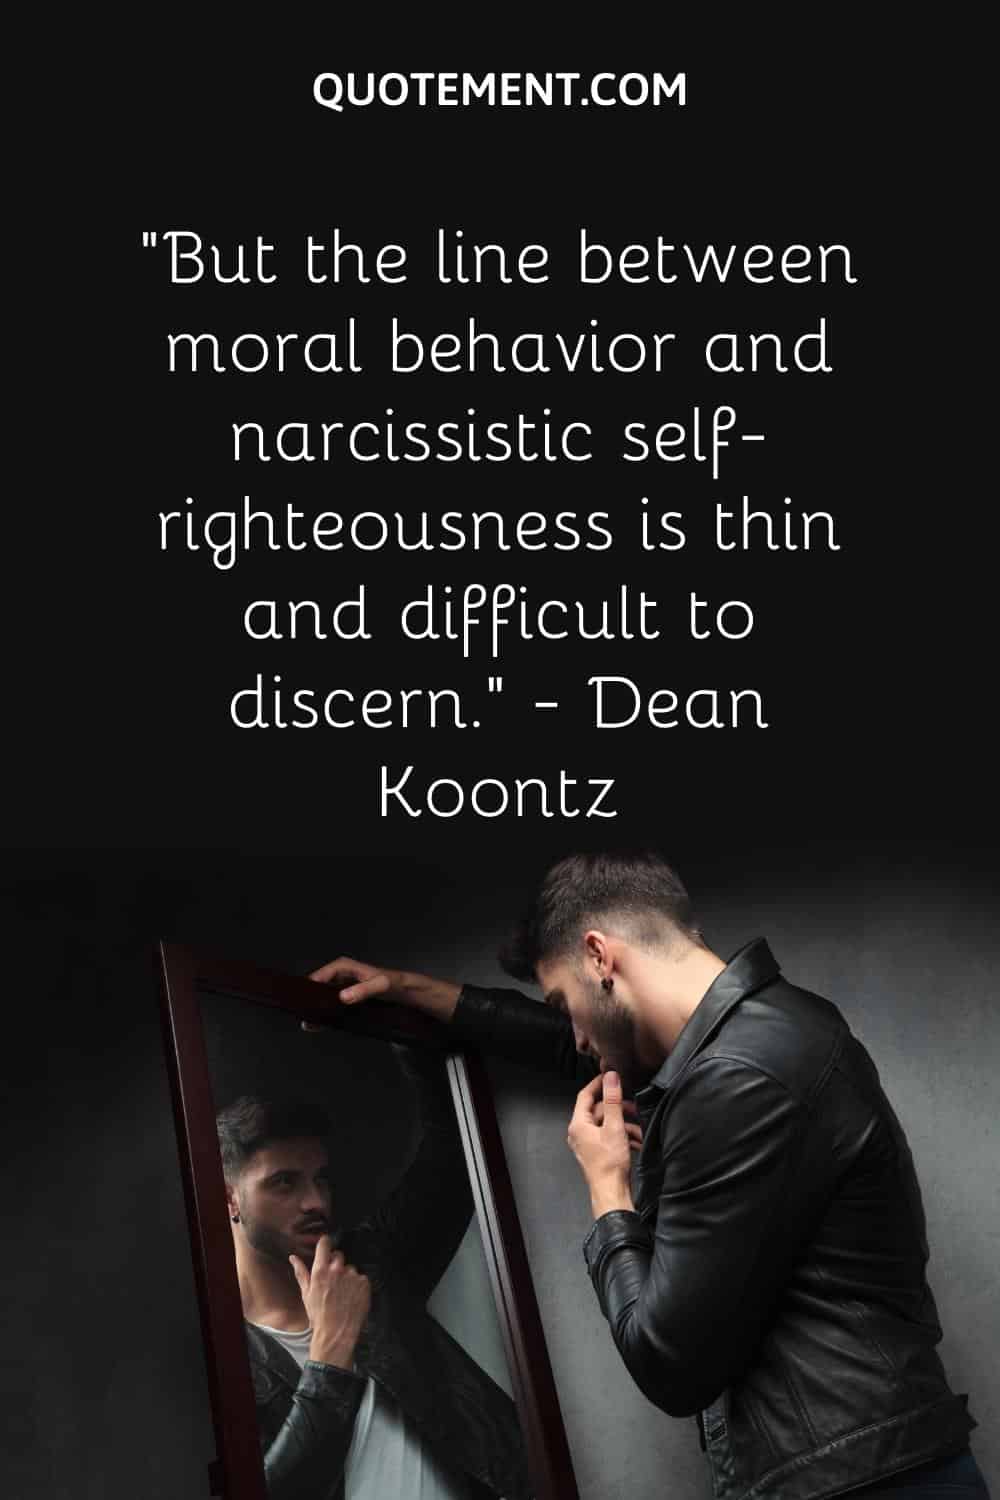 But the line between moral behavior and narcissistic self-righteousness is thin and difficult to discern